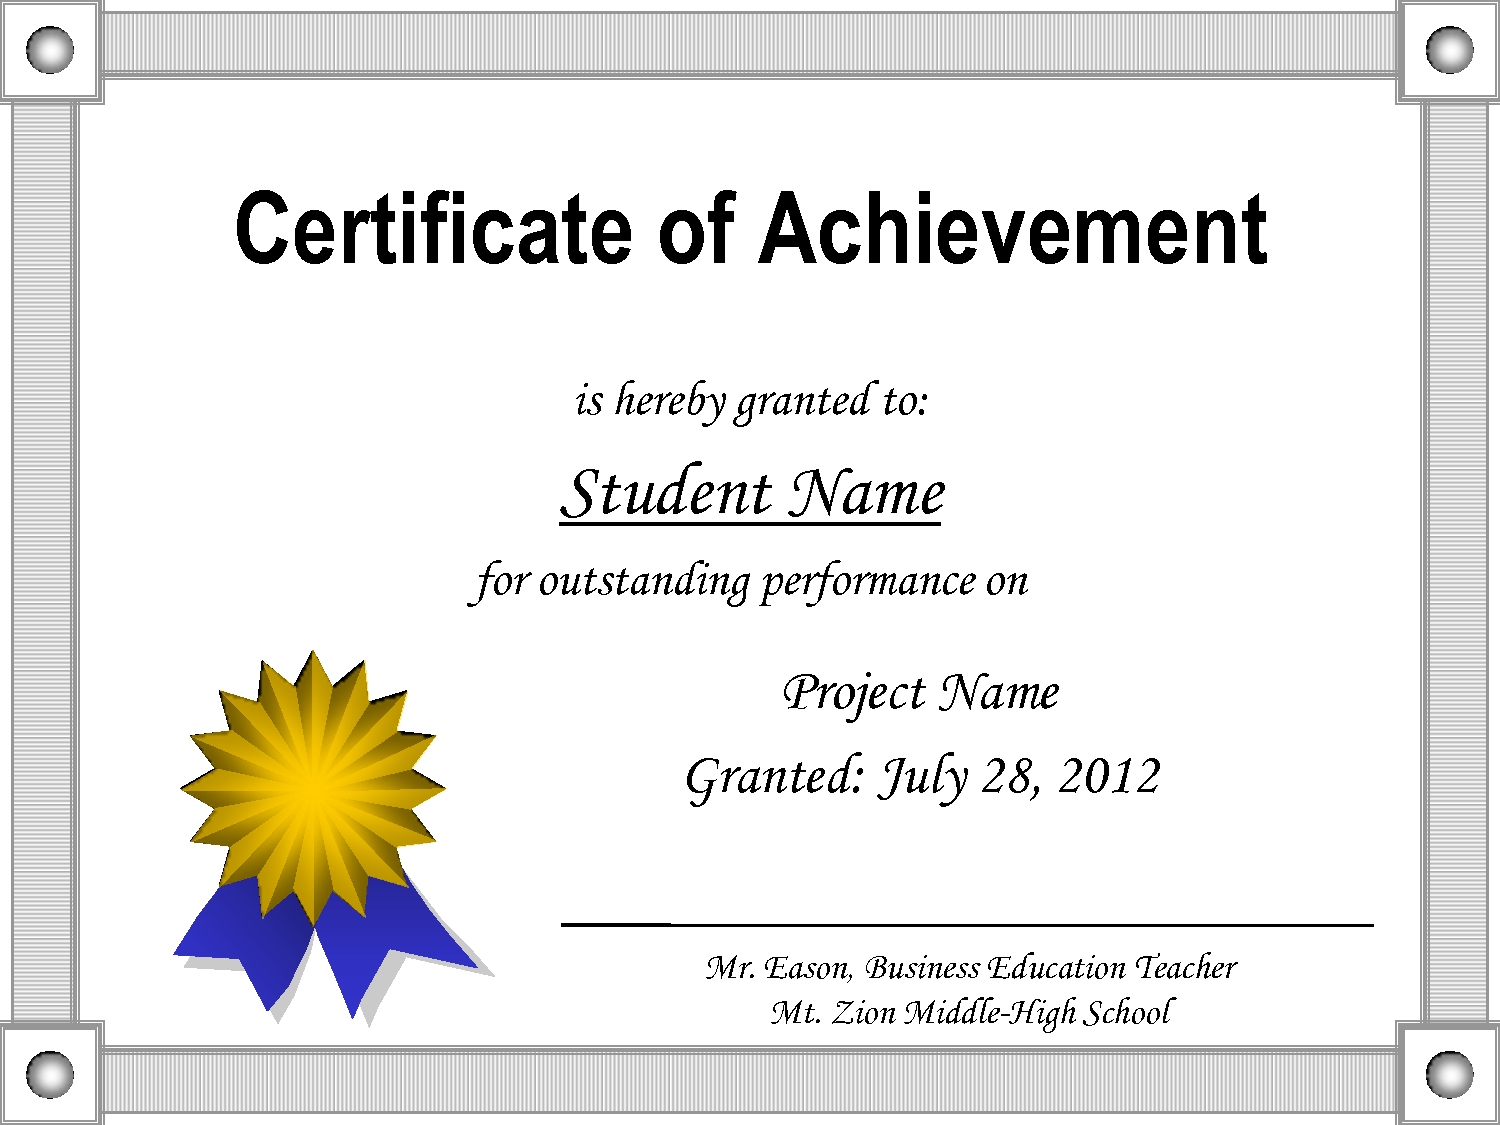 Certificate Of Achievement Template For Certificate Of Achievement Template Word